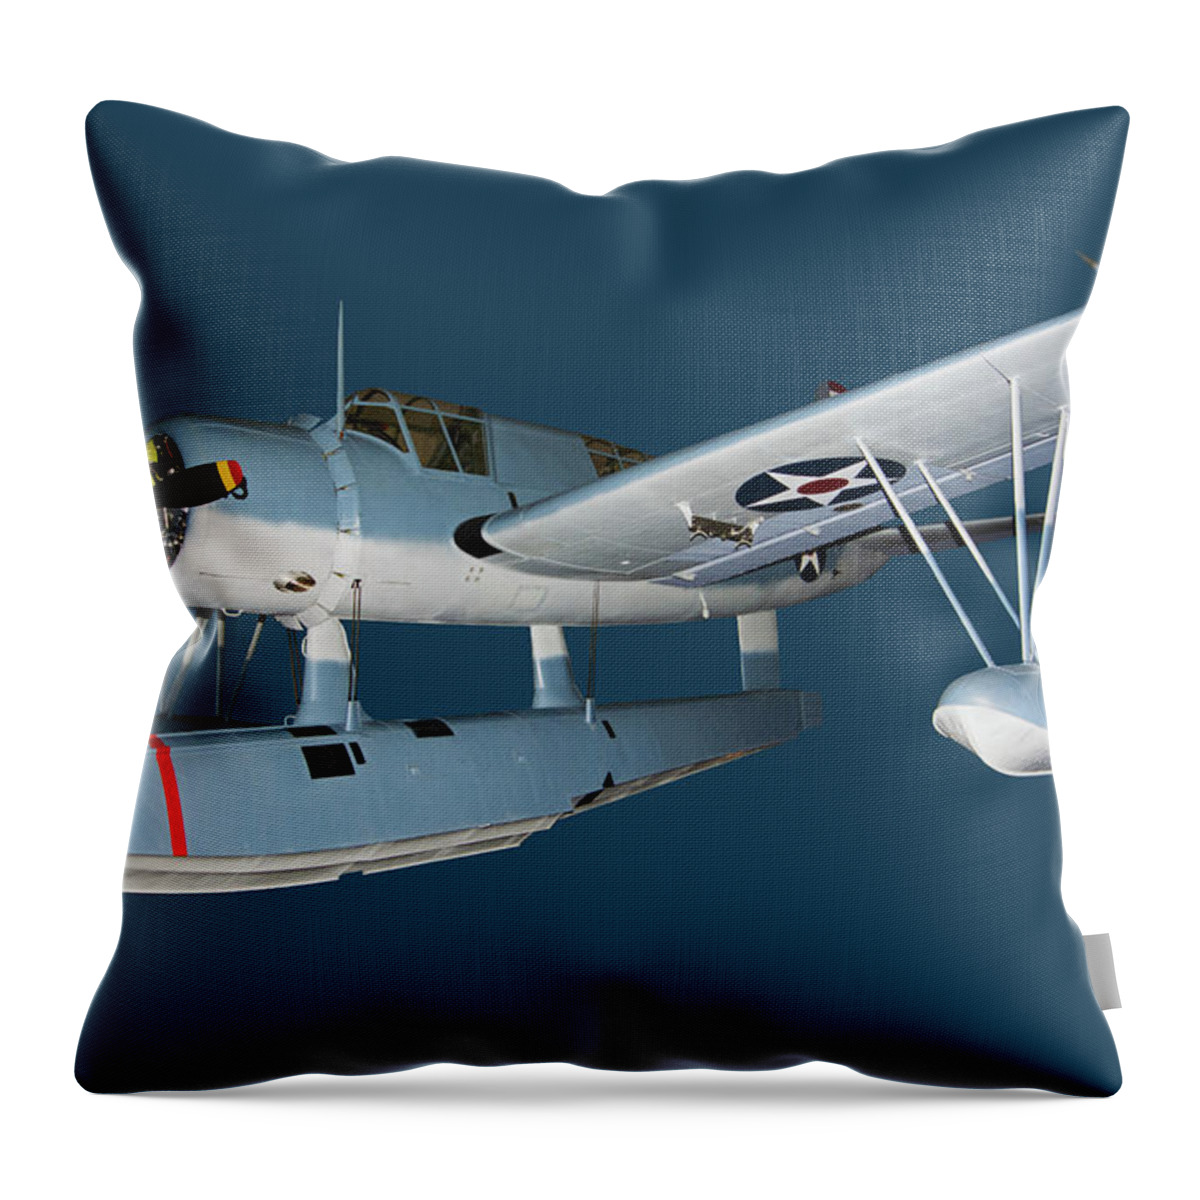 Aerospace Throw Pillow featuring the photograph Vought-sikorsky Os2u-3 Kingfisher. Wwii by Millard H. Sharp